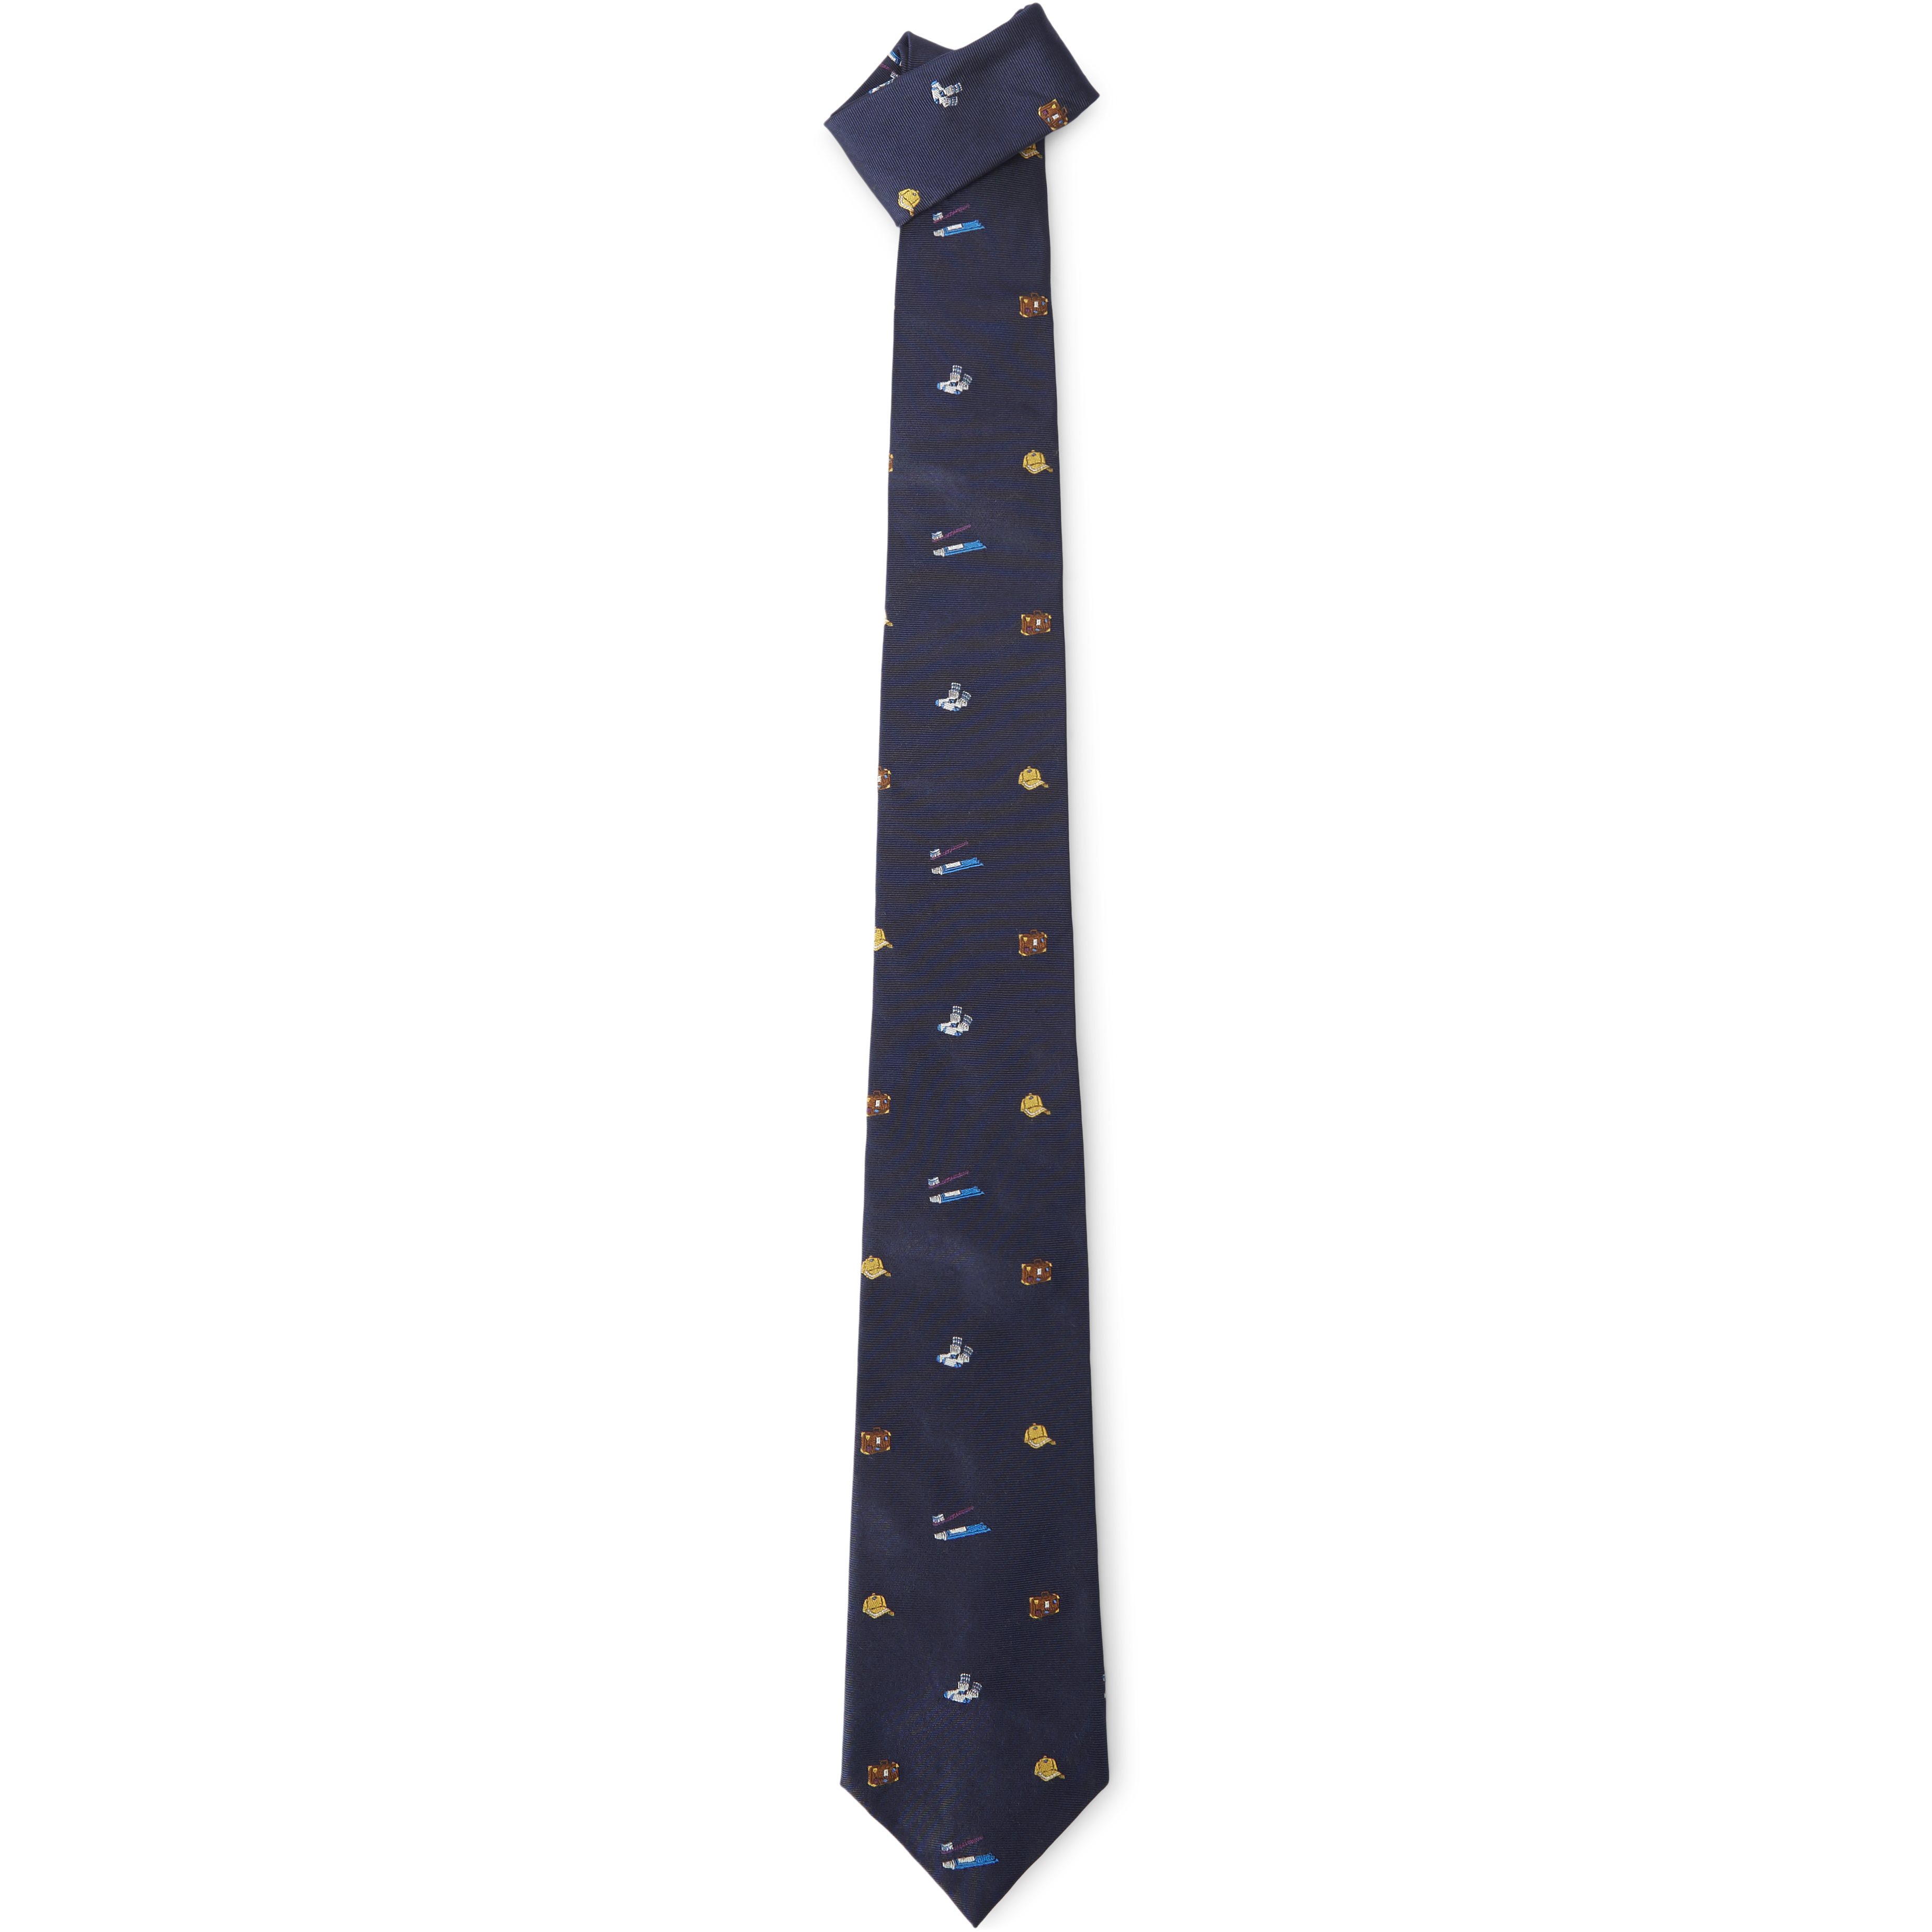 Paul Smith Accessories Ties 552M A40535 Blue